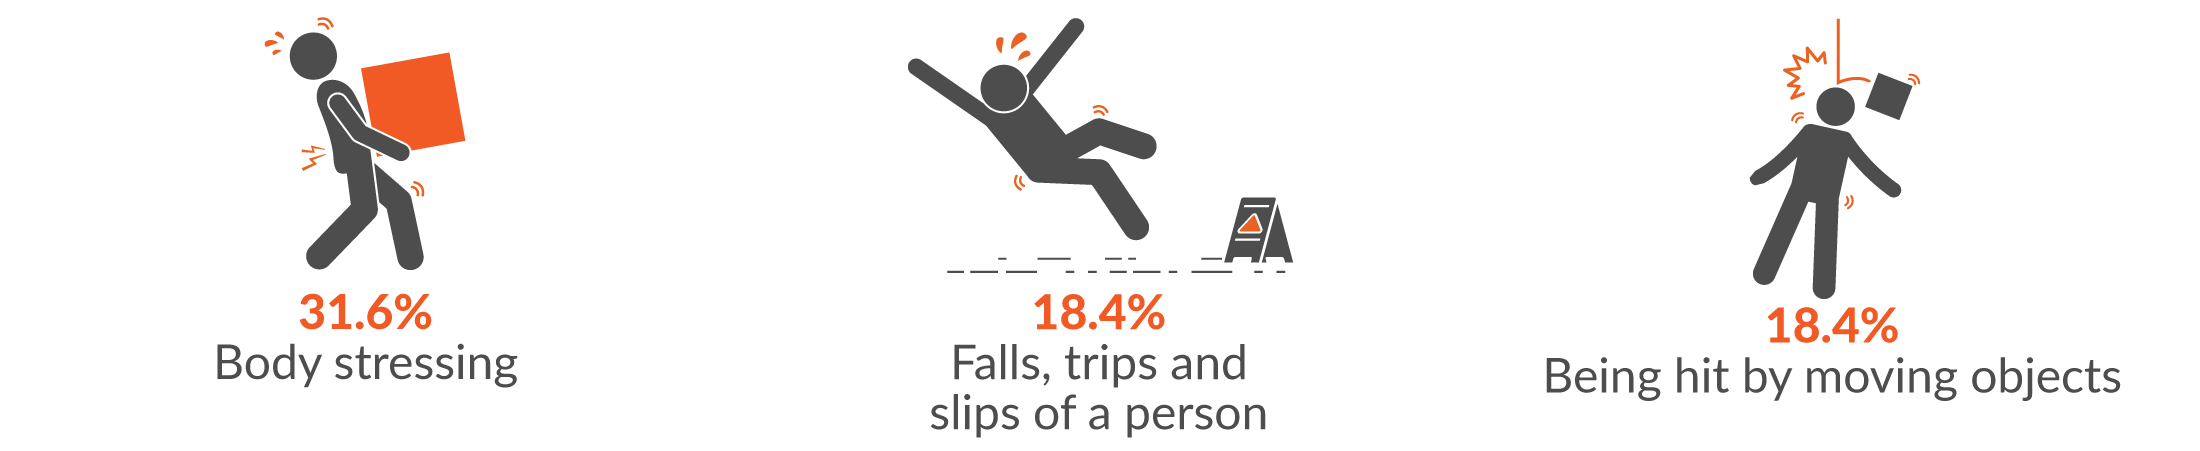 This infographic shows the main three mechanisms of serious injury for Retail Trade claims were 31.6% body stressing; 18.4% Falls, trips and slips of a person and 18.4% being hit by moving objects.